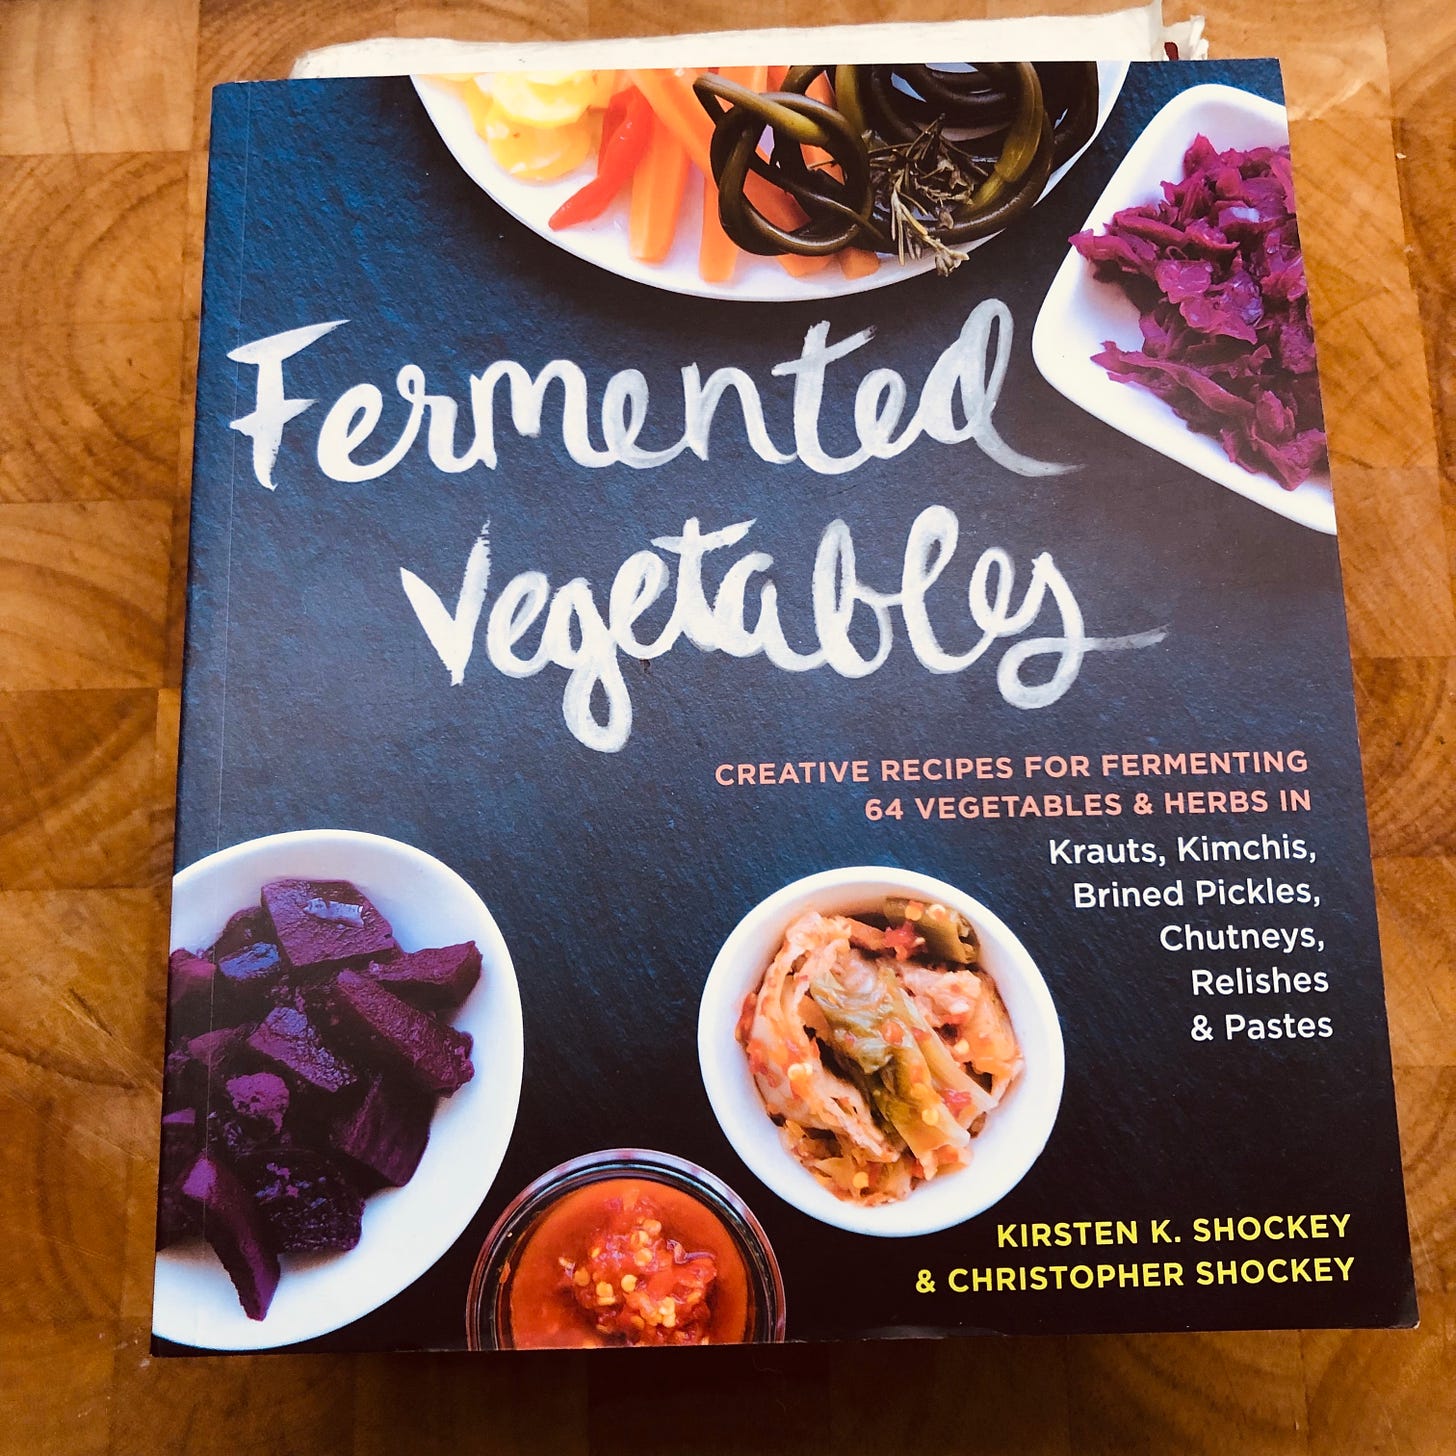 The cover of the book "Fermented Vegetables."